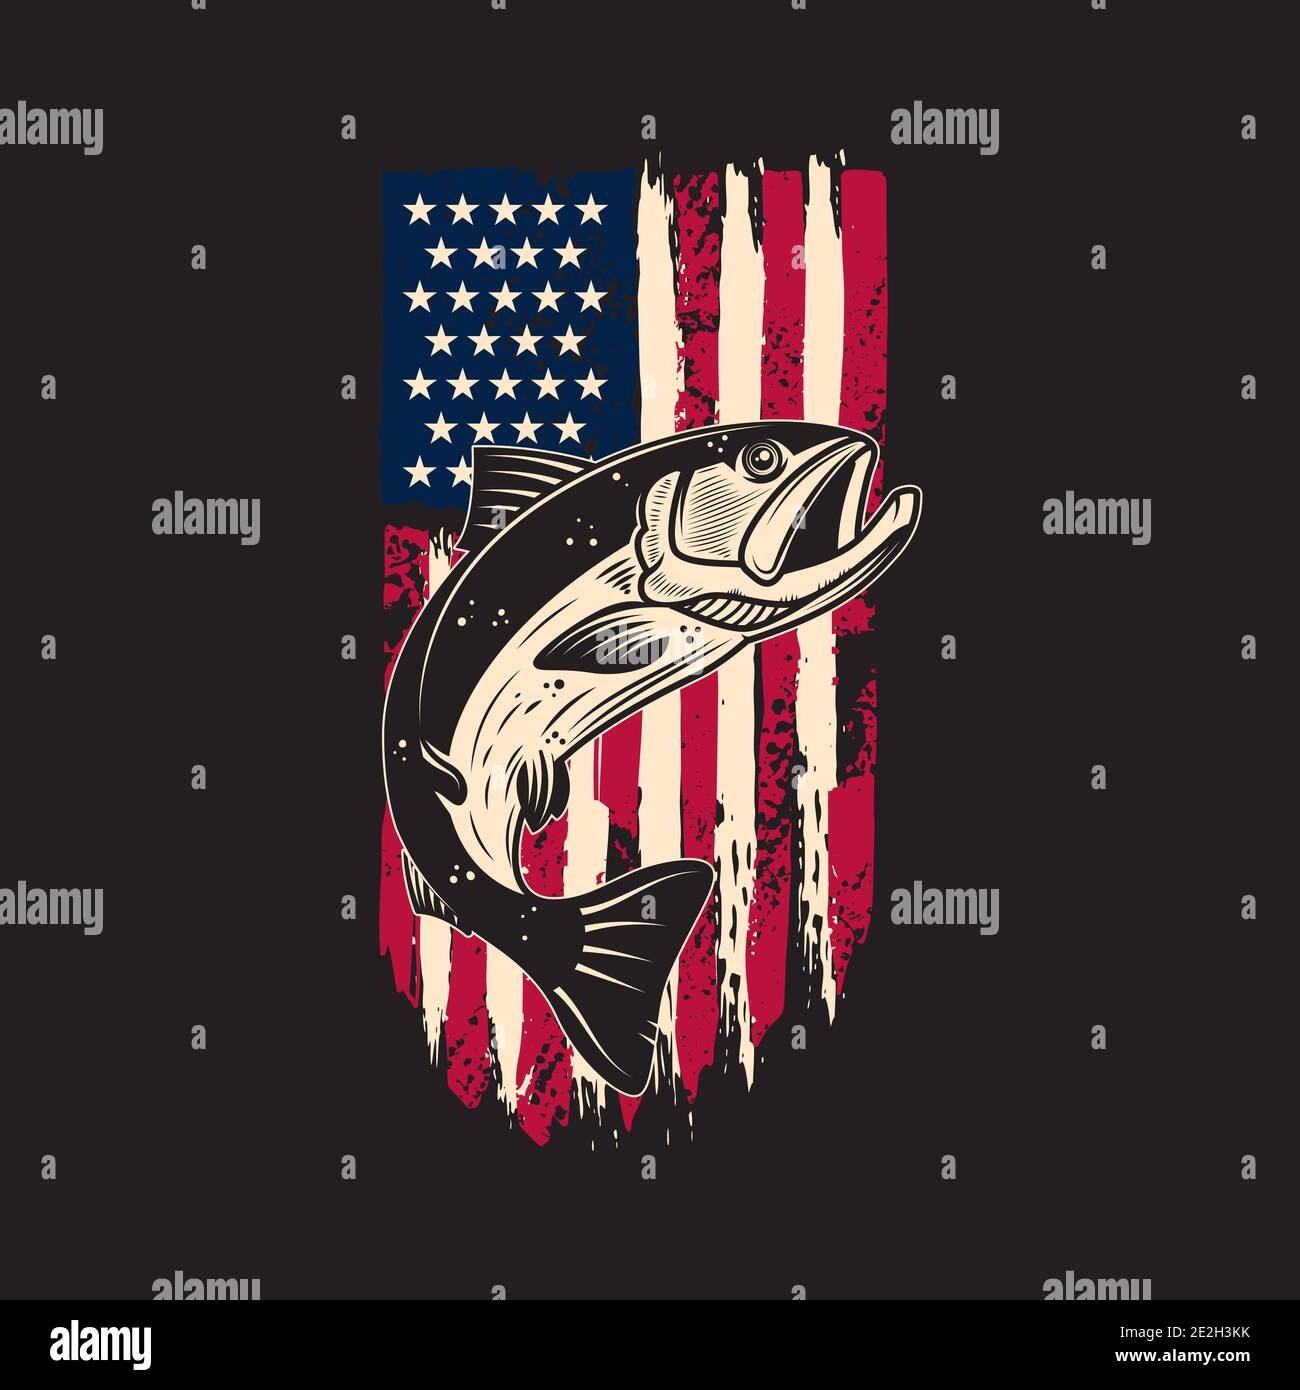 Illustration of salmon fish of background of usa flag in grunge